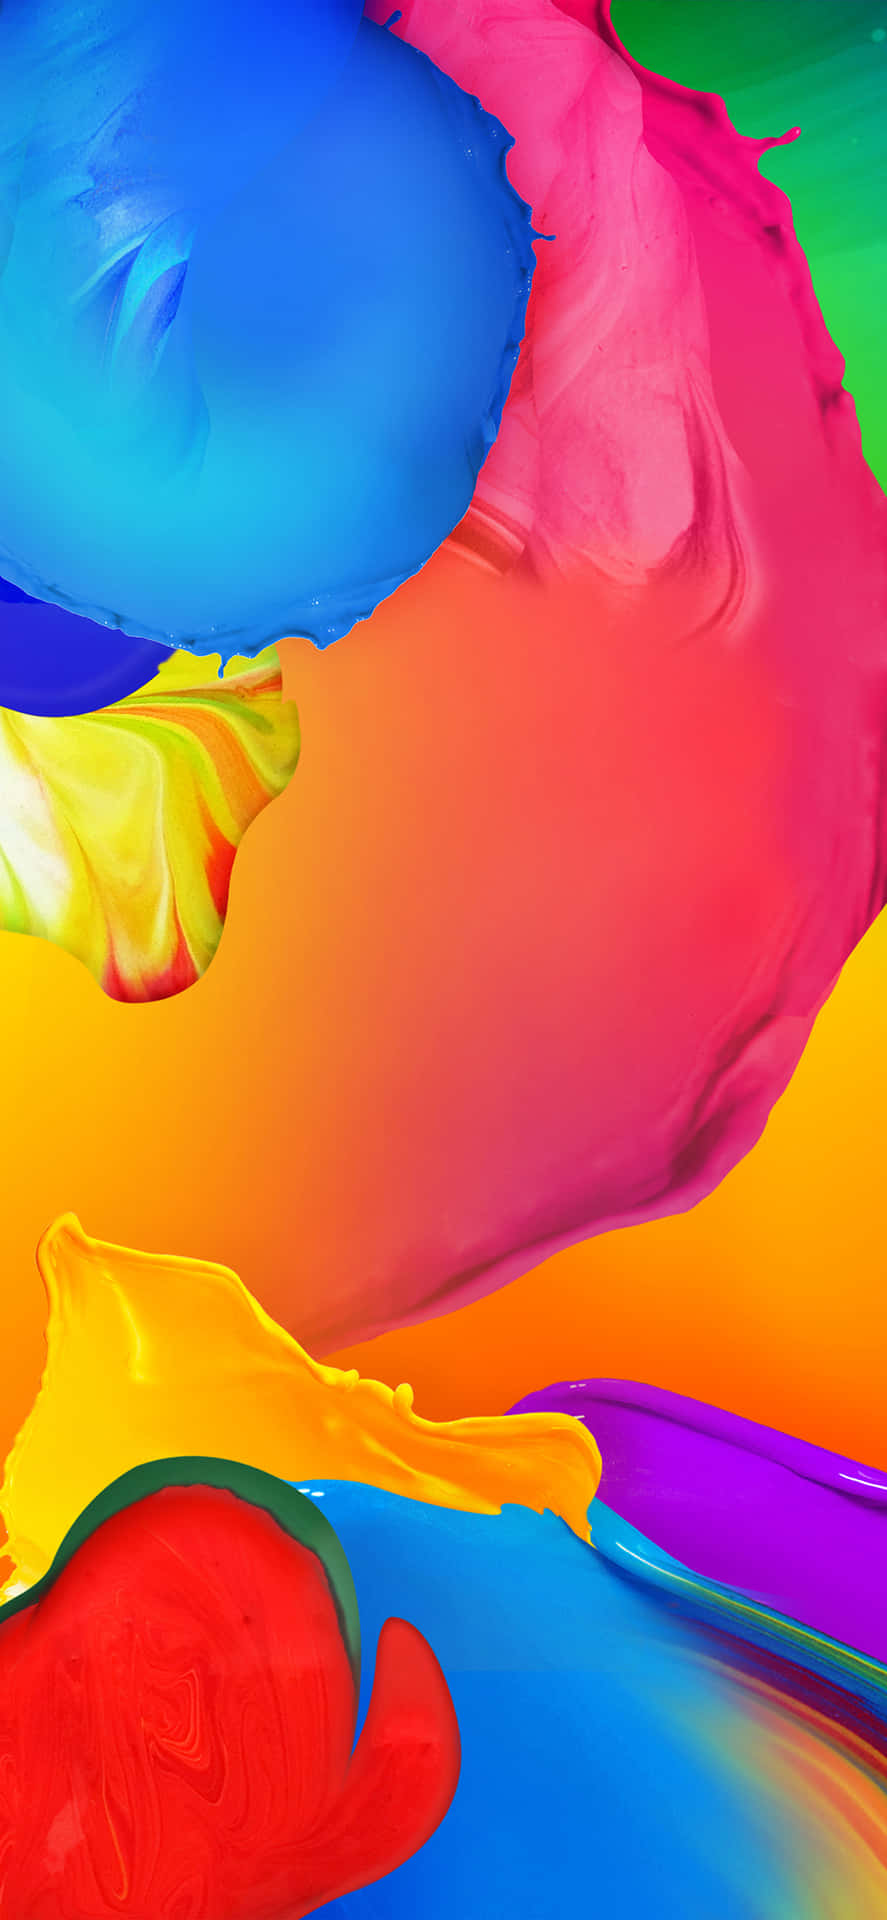 A Colorful Painting With A Rainbow Of Colors Background